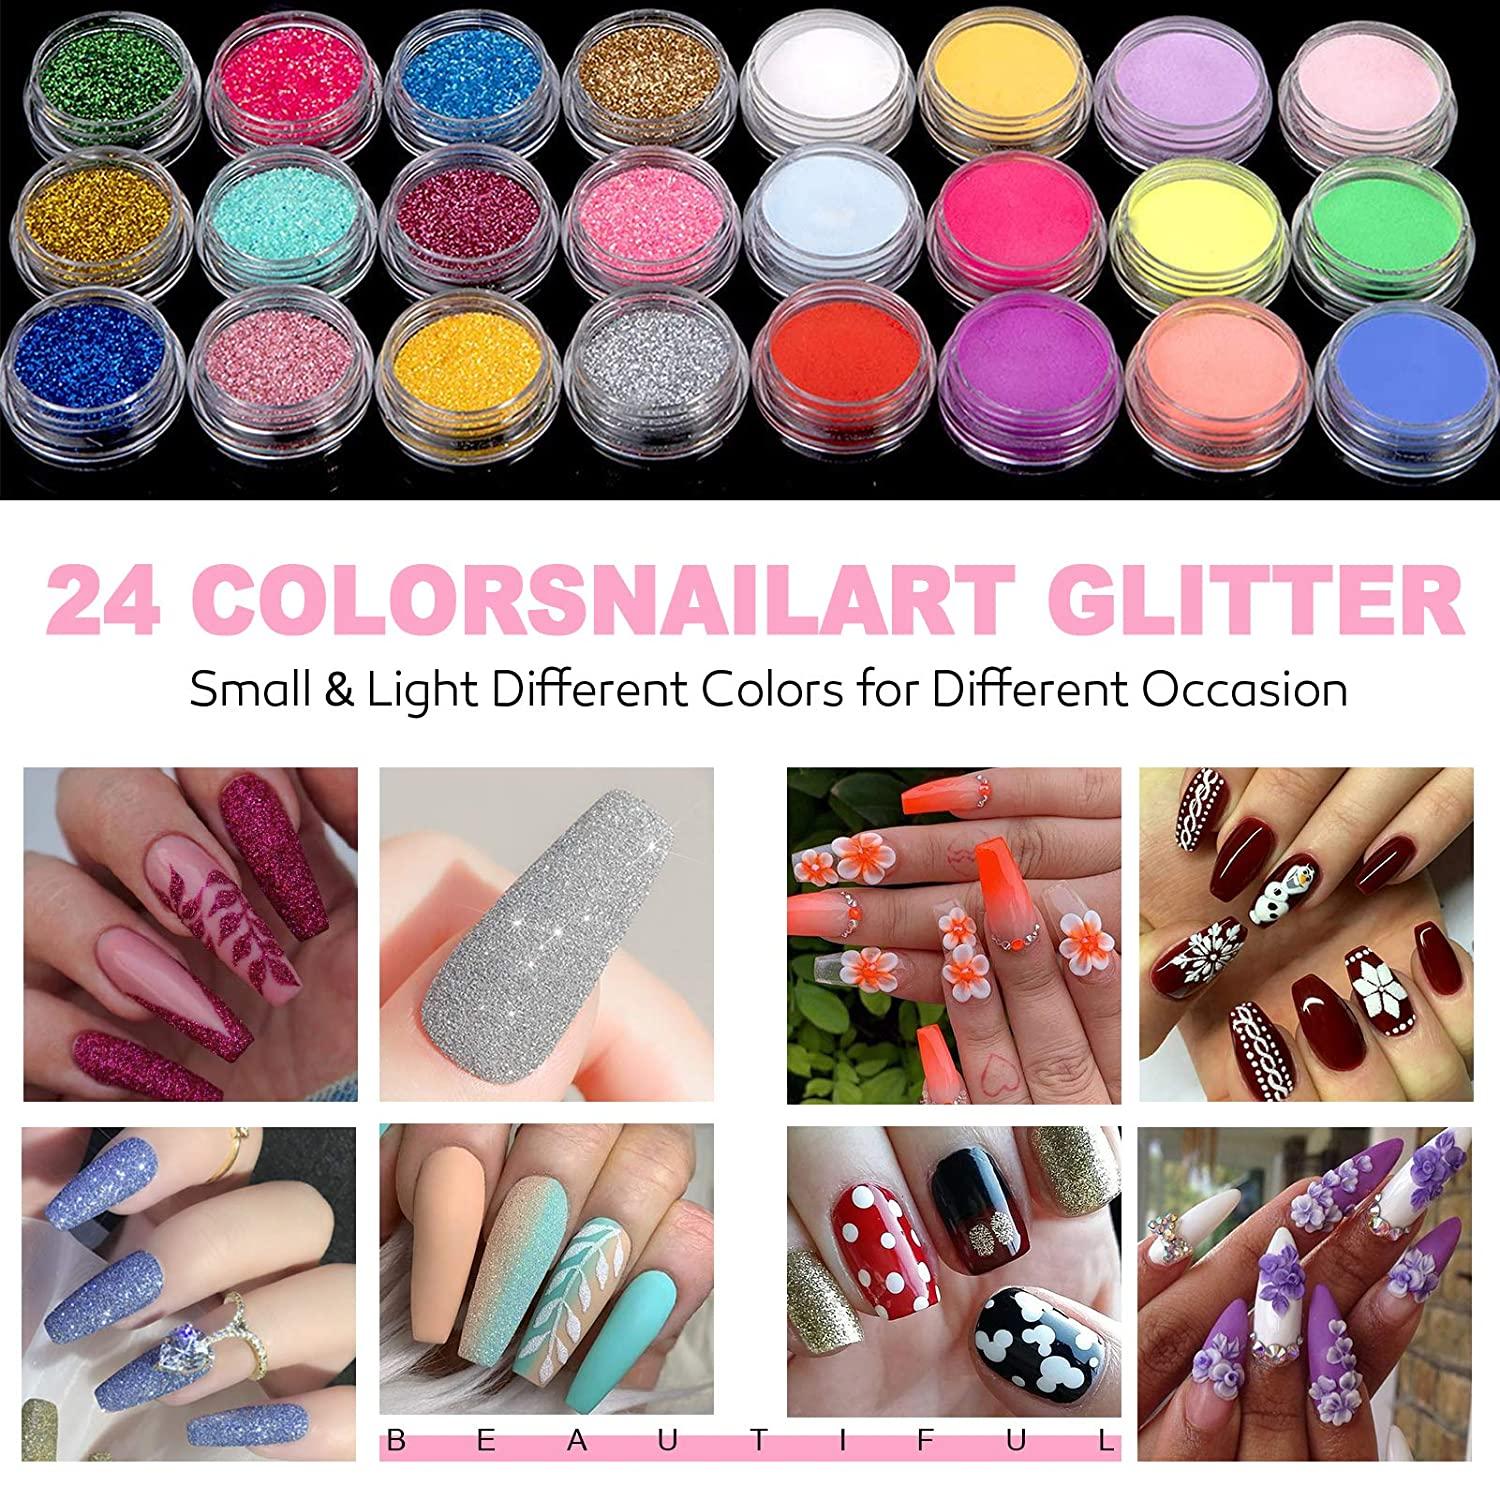 Complete Acrylic Kit by Glitterbels – All Things Nail Supply